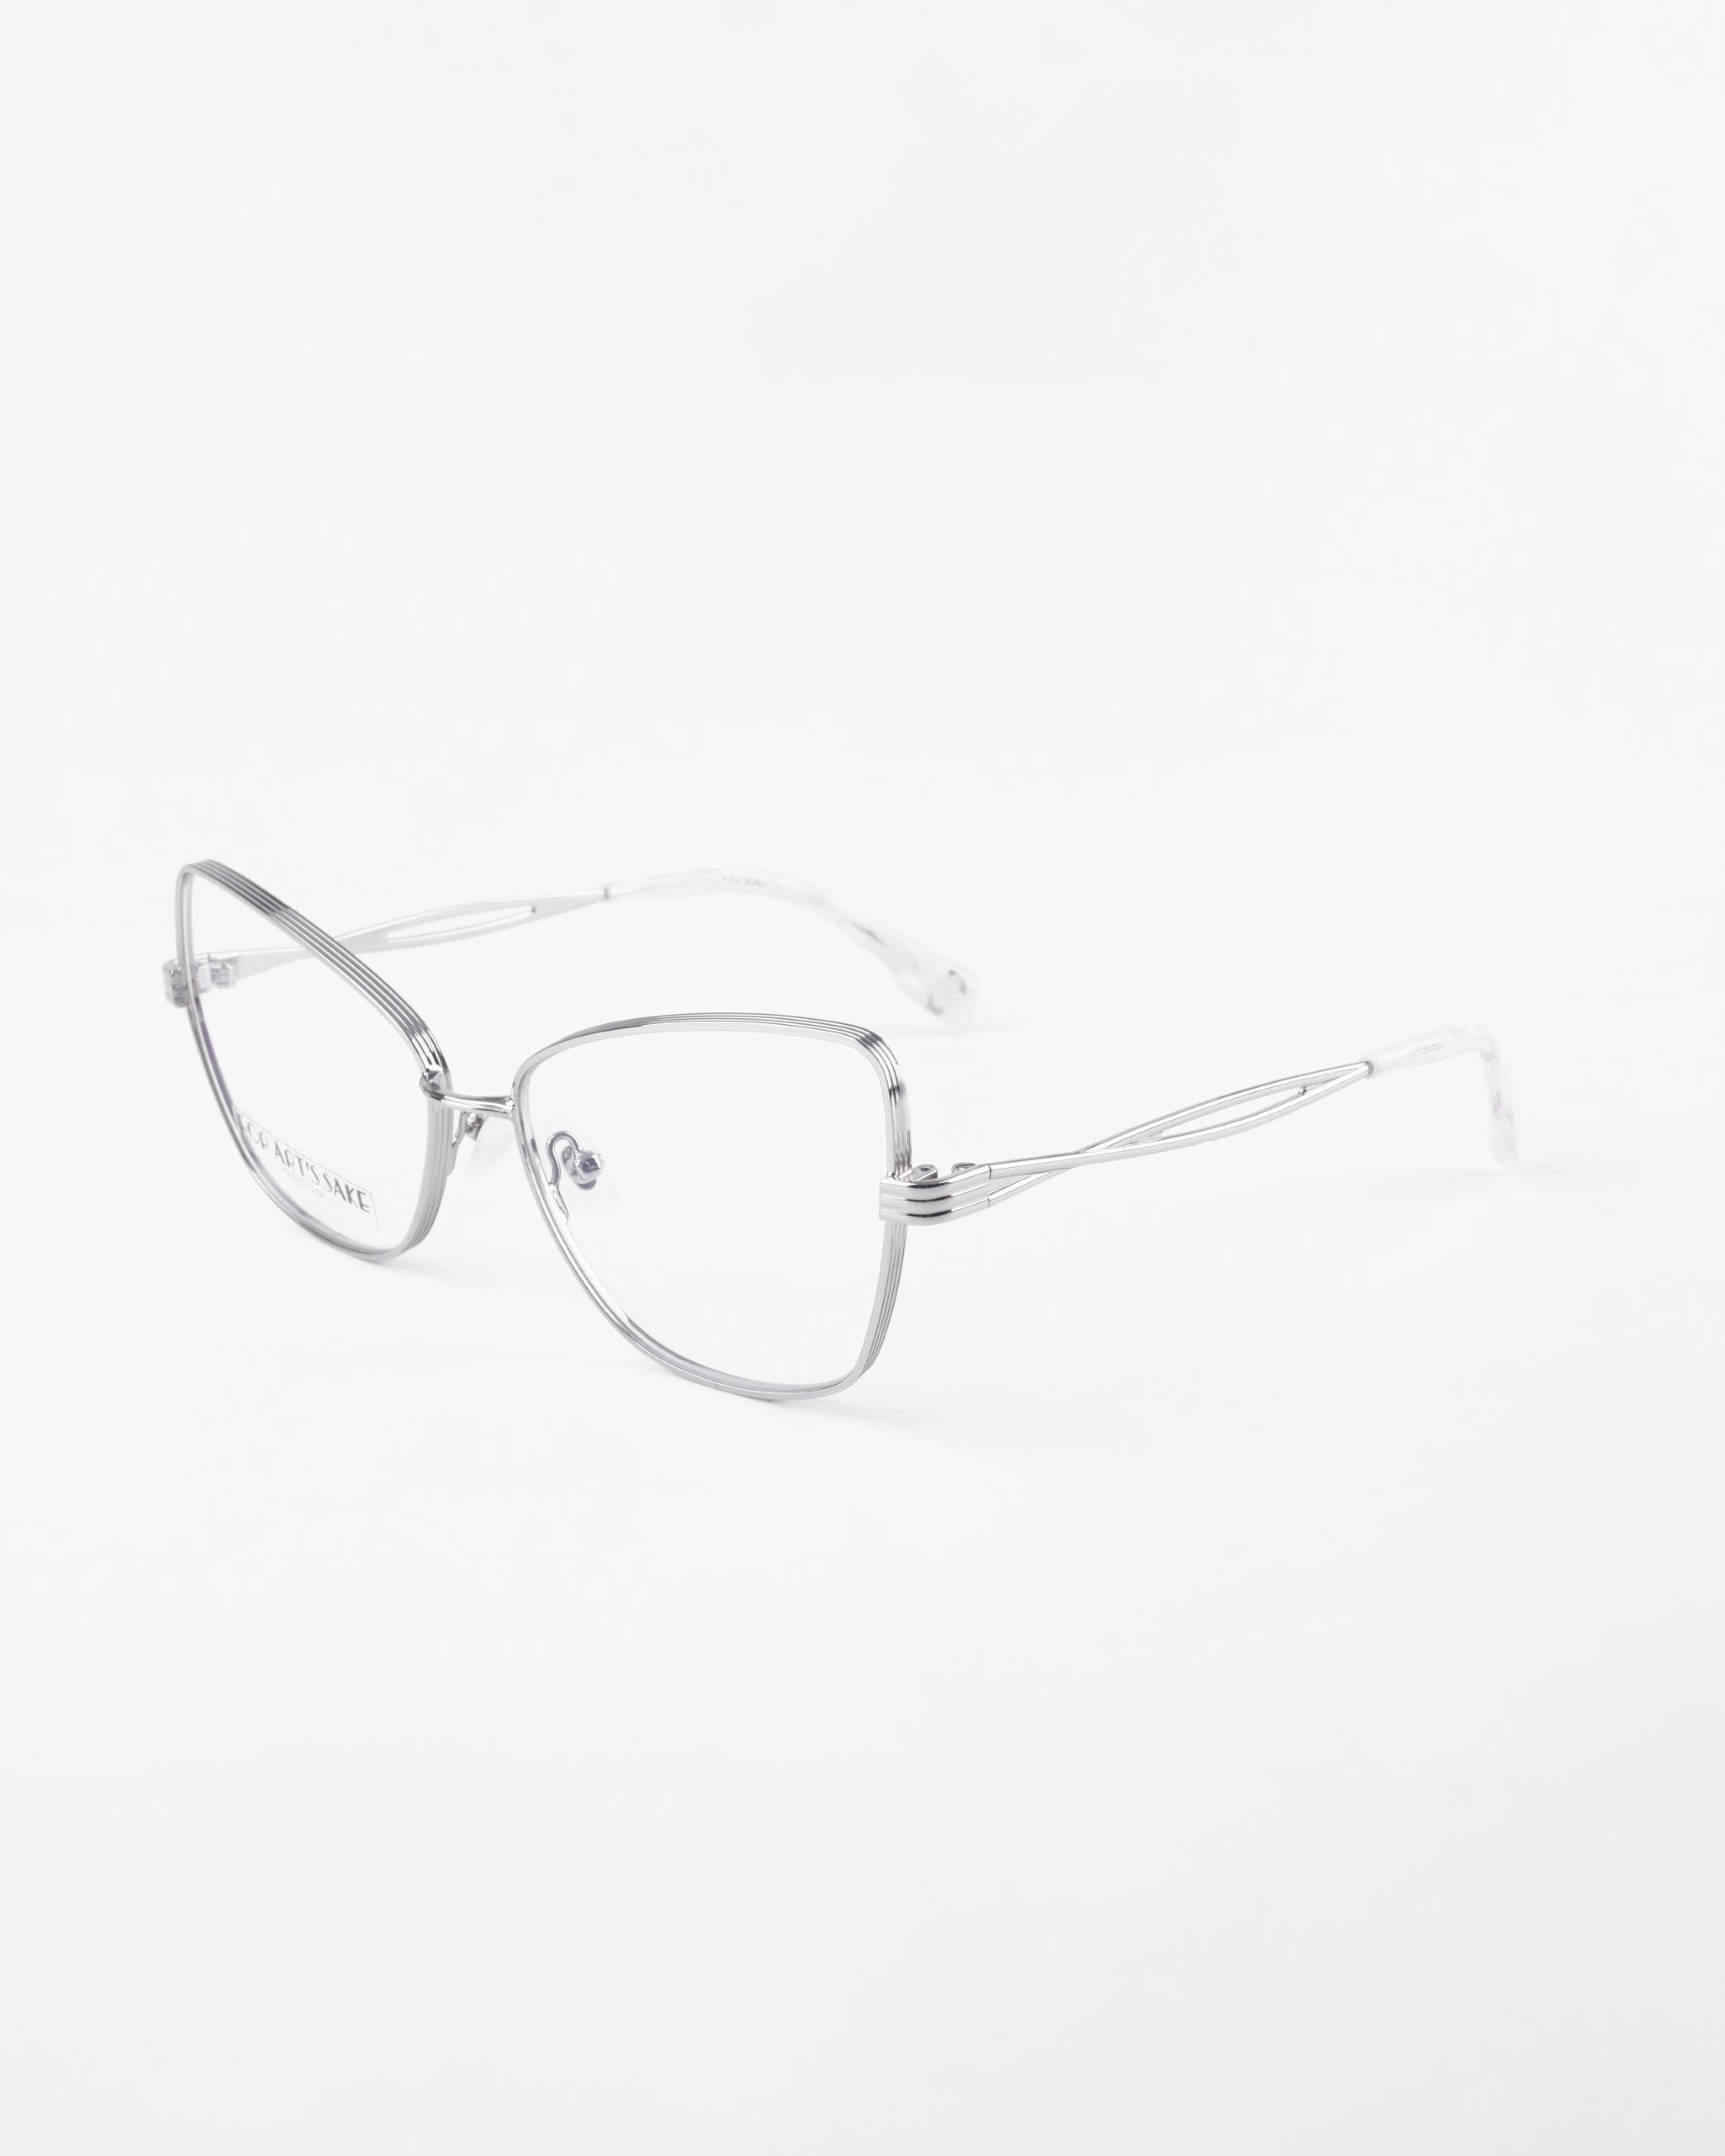 A pair of silver metal-framed eyeglasses named Lady with a minimalist design from For Art&#39;s Sake®. The glasses have thin, rectangular lenses featuring a blue light filter and delicate temple arms. The backdrop is plain white, highlighting the sleek and modern aesthetic of the eyewear.